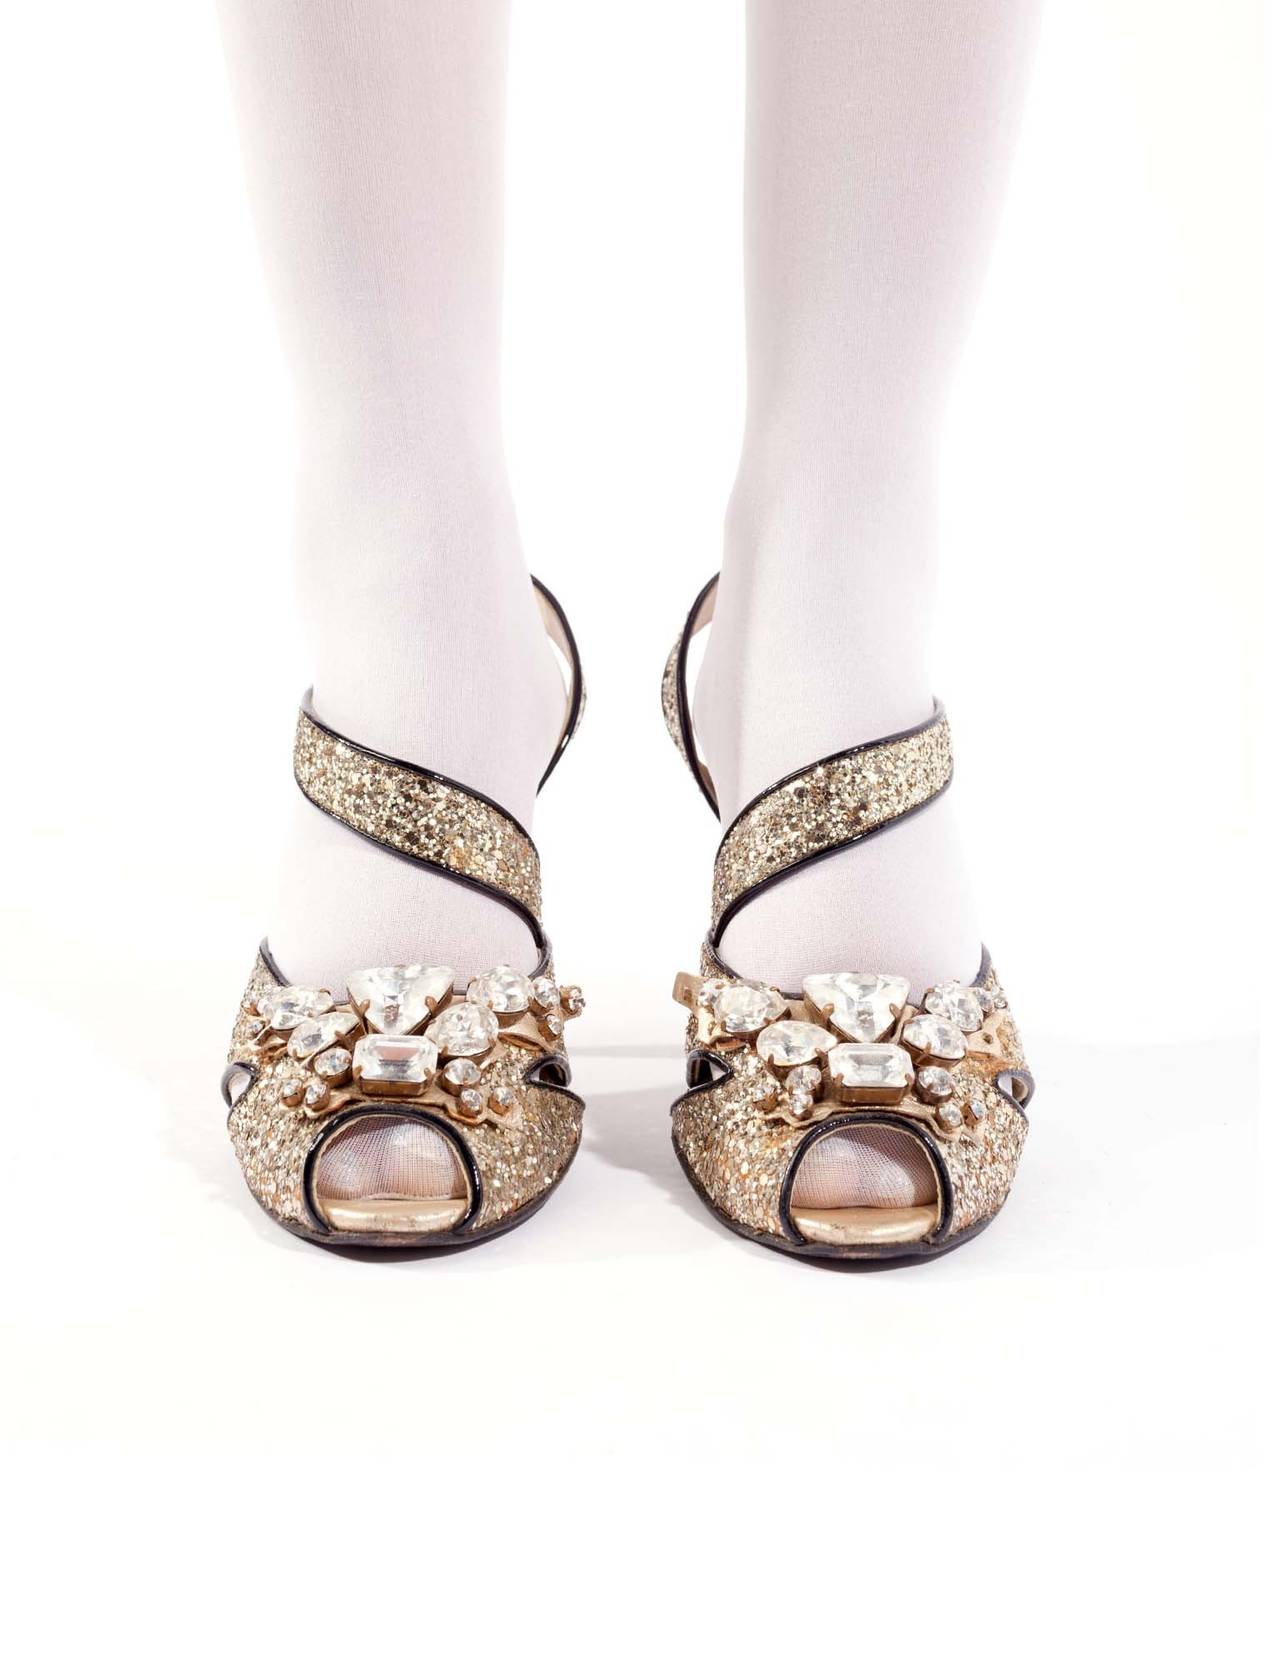 MIU MIU Silver glitter rhinestone heels. Heels are slingback with black patent leather piping detail. adjustable sling back straps. Multi-stone embellished fronts with clear, silver set rhinestones, and cubic zirconia trim. Some stones are missing,